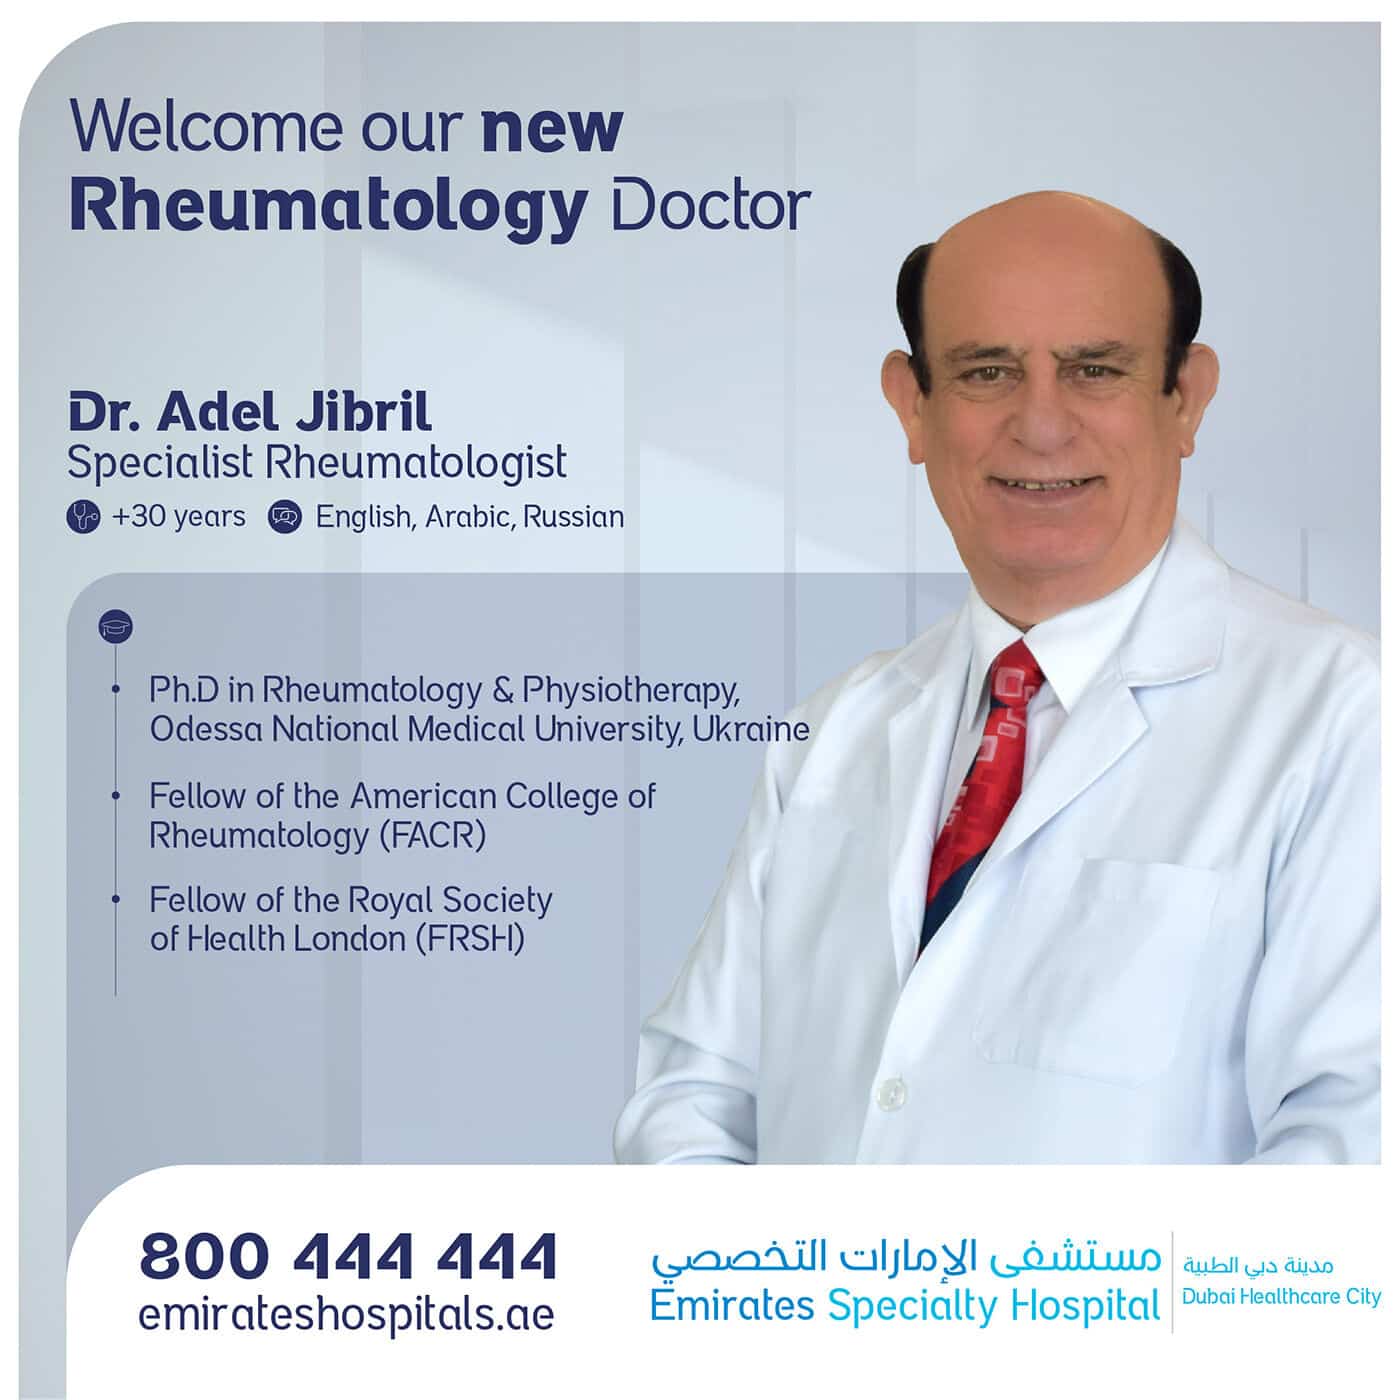 Dr. Adel Jibril is Joining Emirates Specialty Hospital